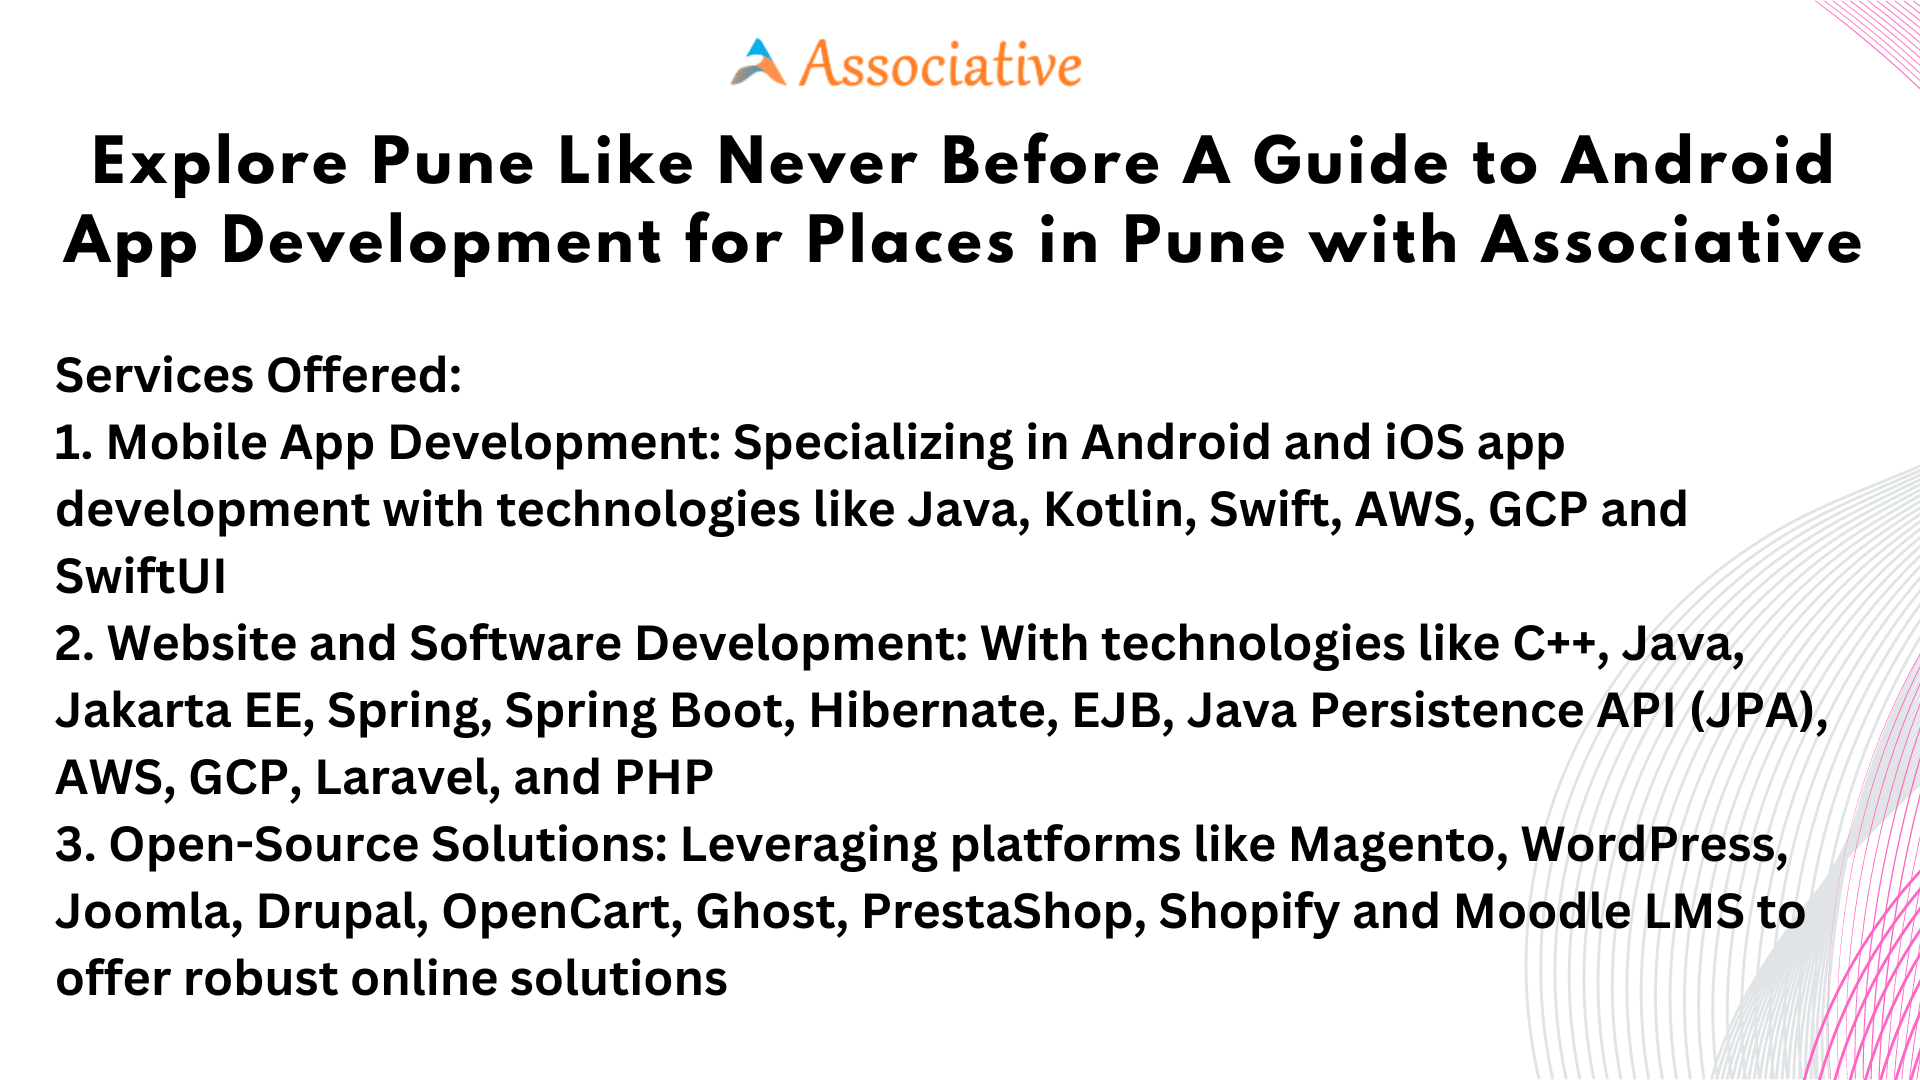 Explore Pune Like Never Before A Guide to Android App Development for Places in Pune with Associative